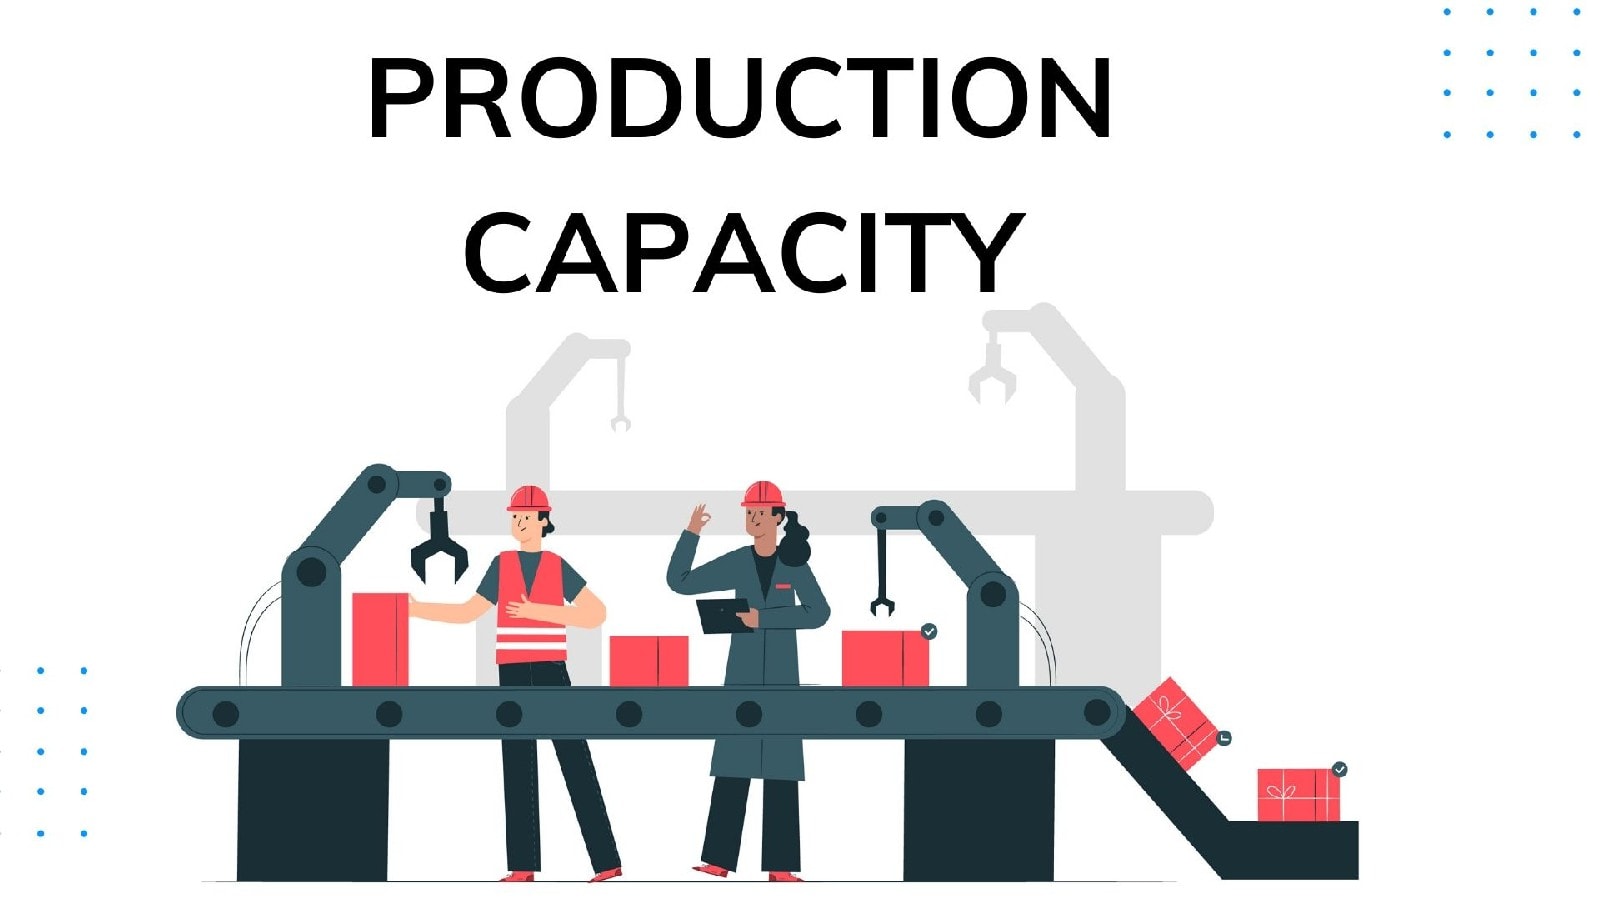 Production Capacity - Definition And Example Of Production Capacity